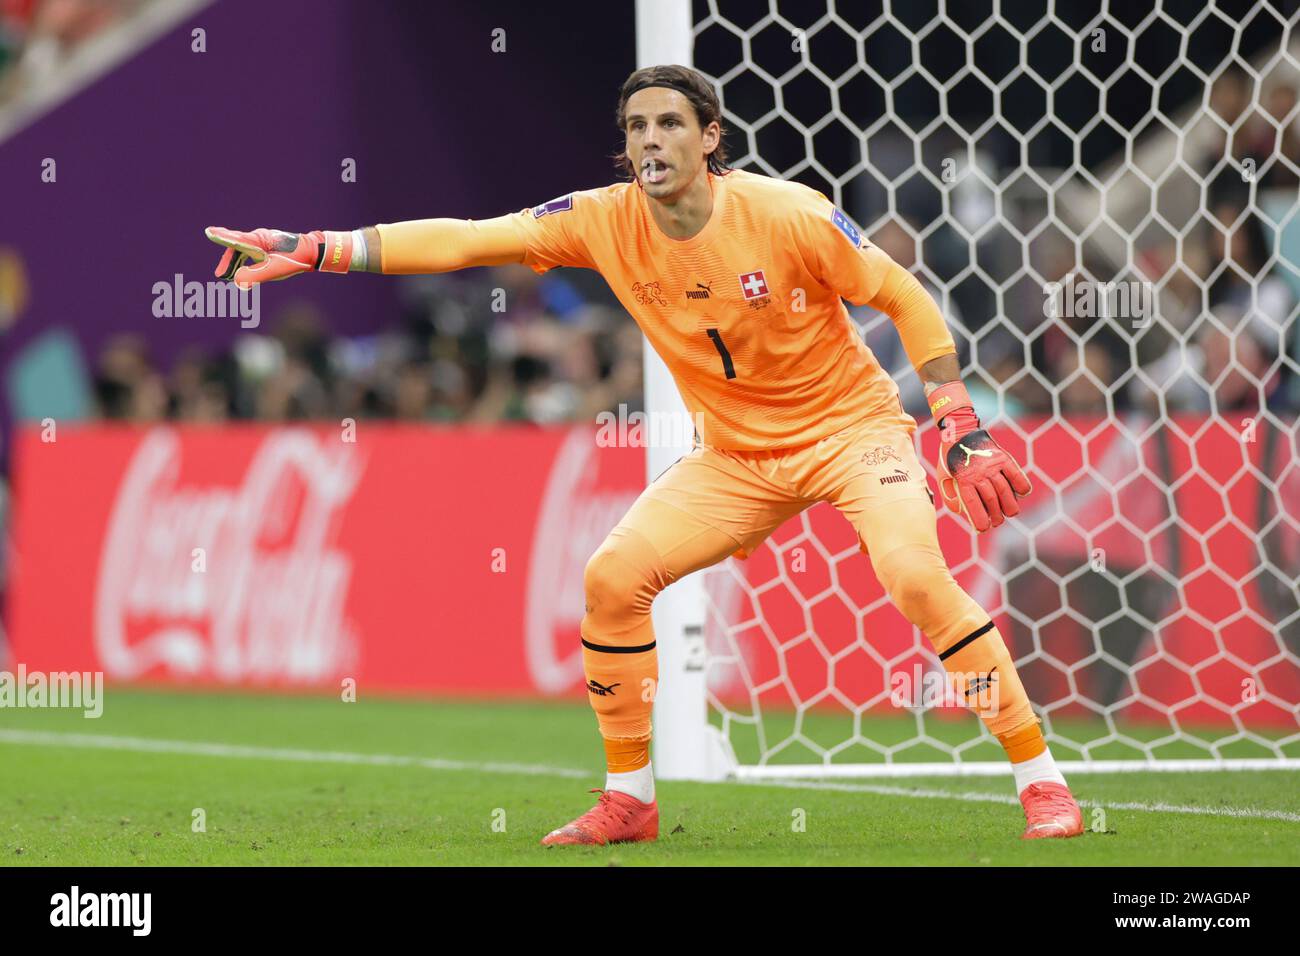 Yann Sommer of Switzerland seen in action during the FIFA World Cup Qatar 2022 match between Portugal and Switzerland at Lusail Stadium. Final score: Portugal 6:1 Switzerland. Stock Photo